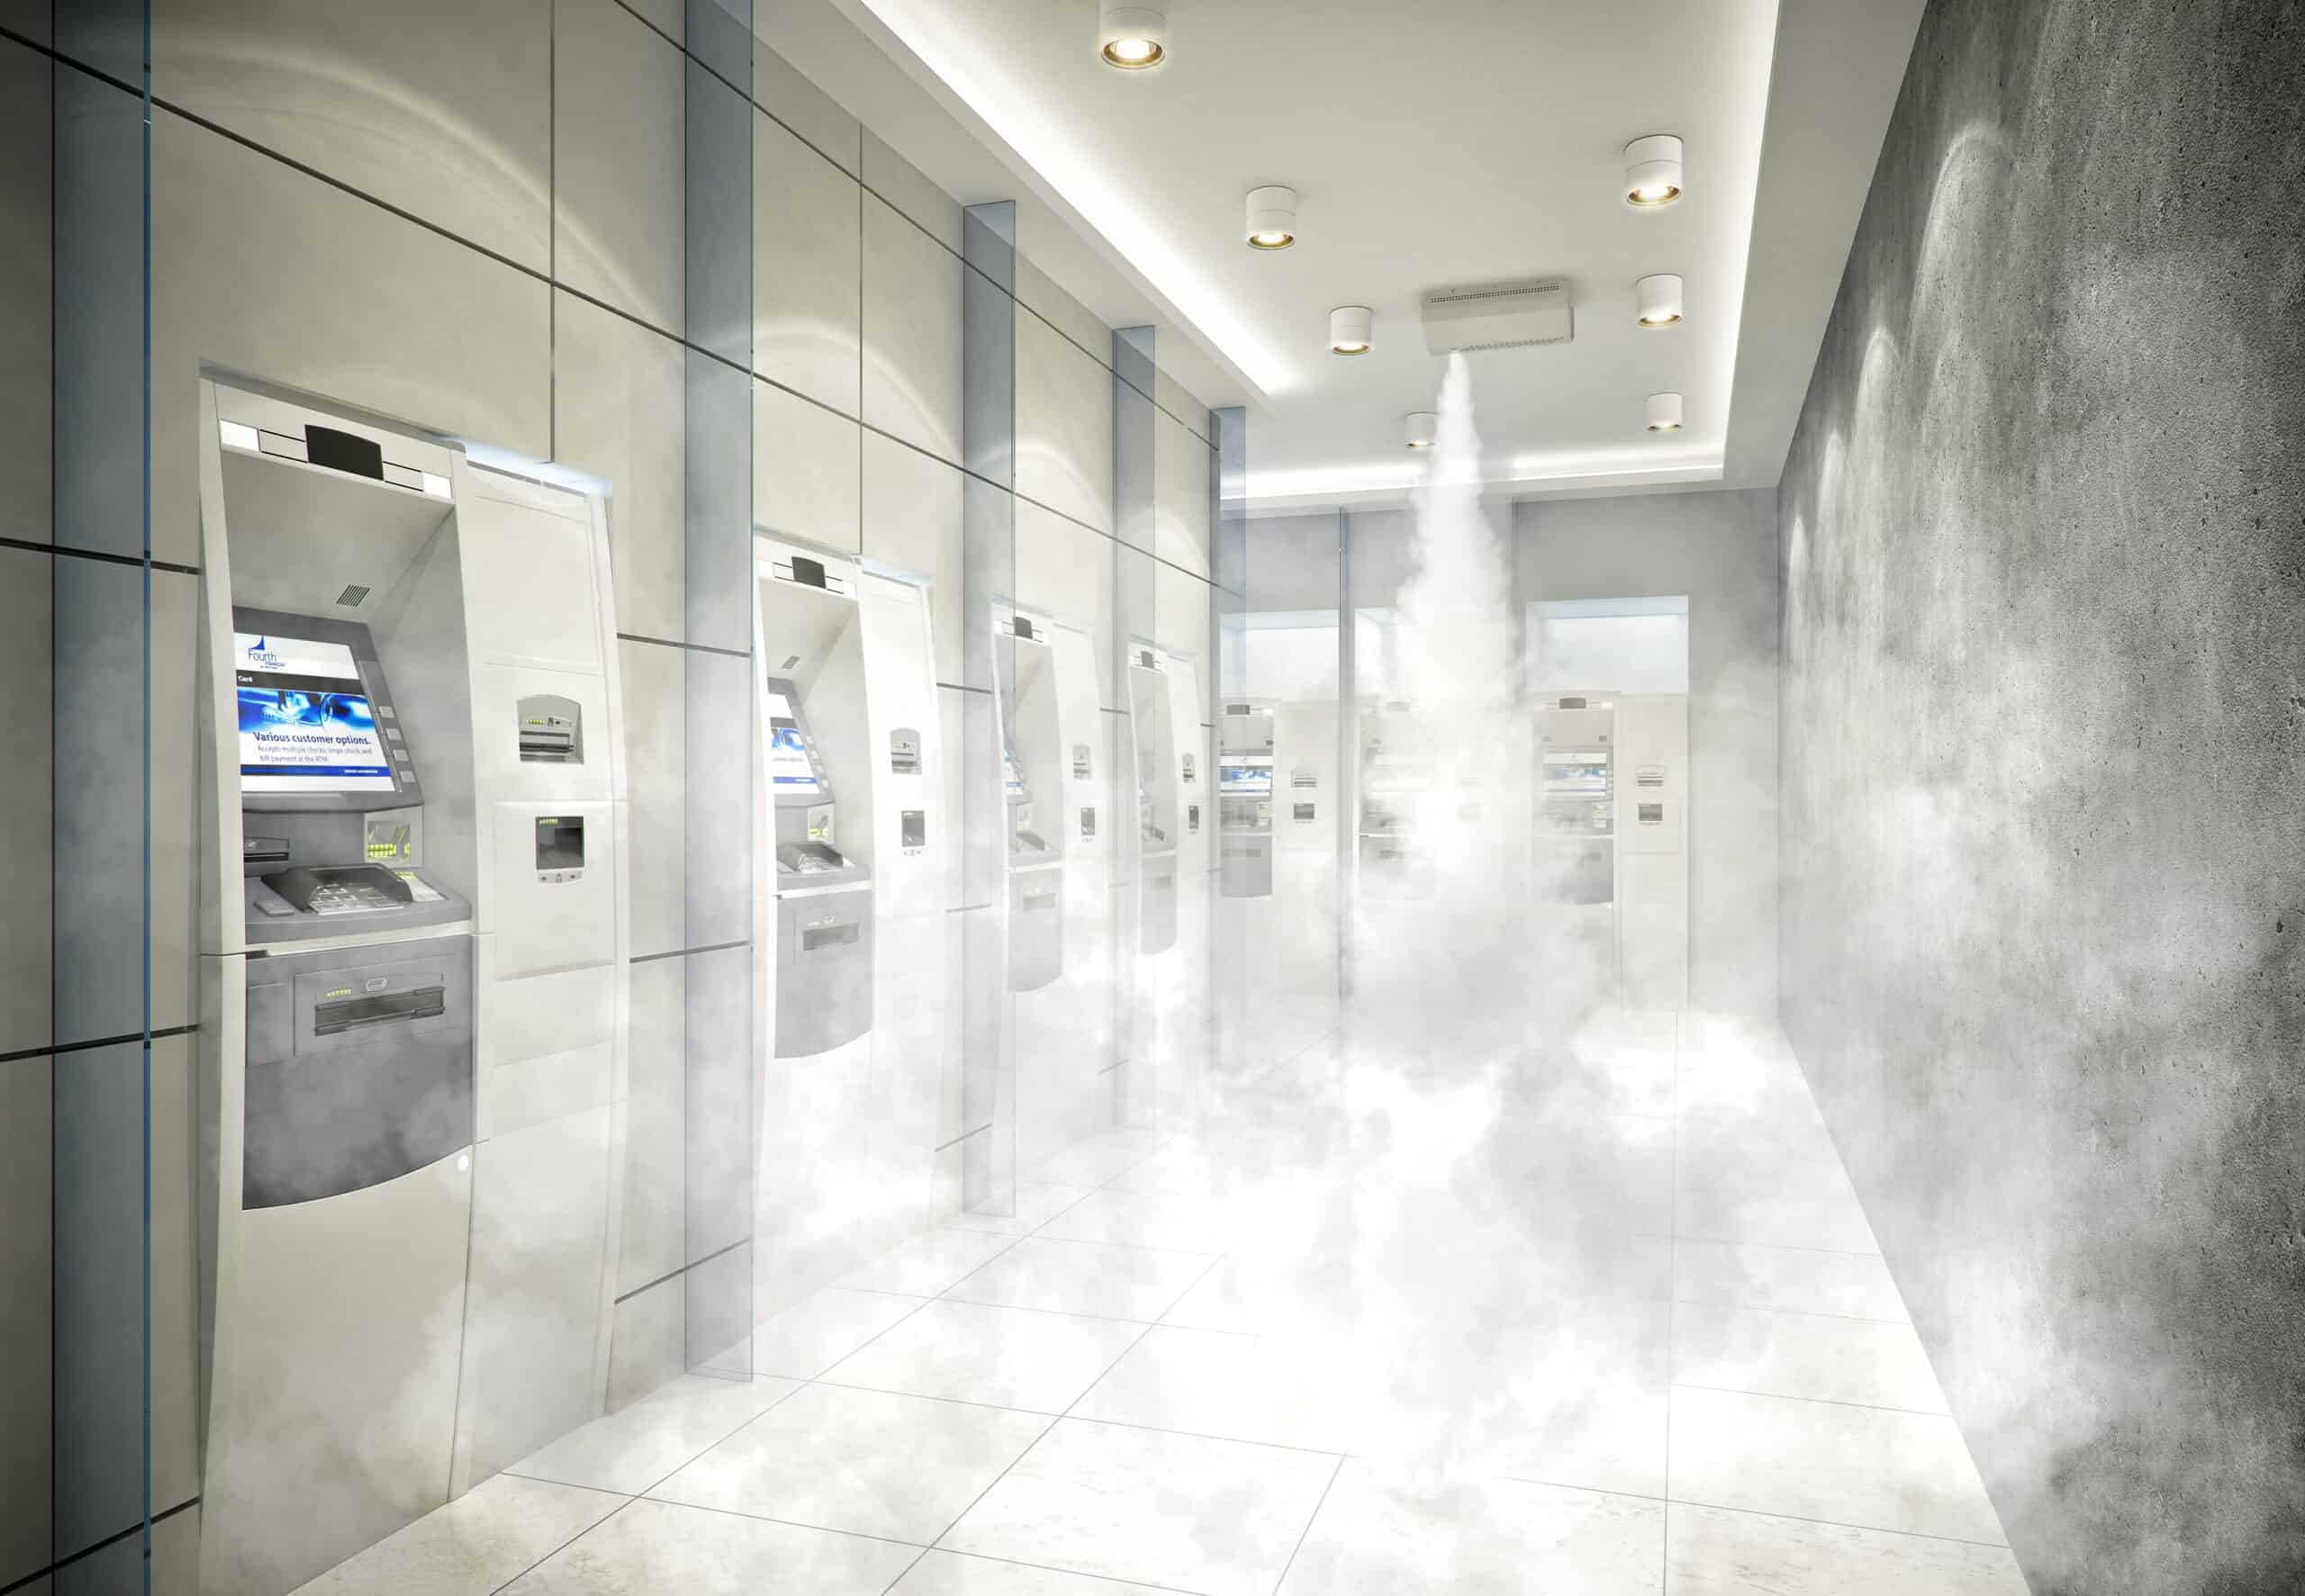 ATM protected by fog